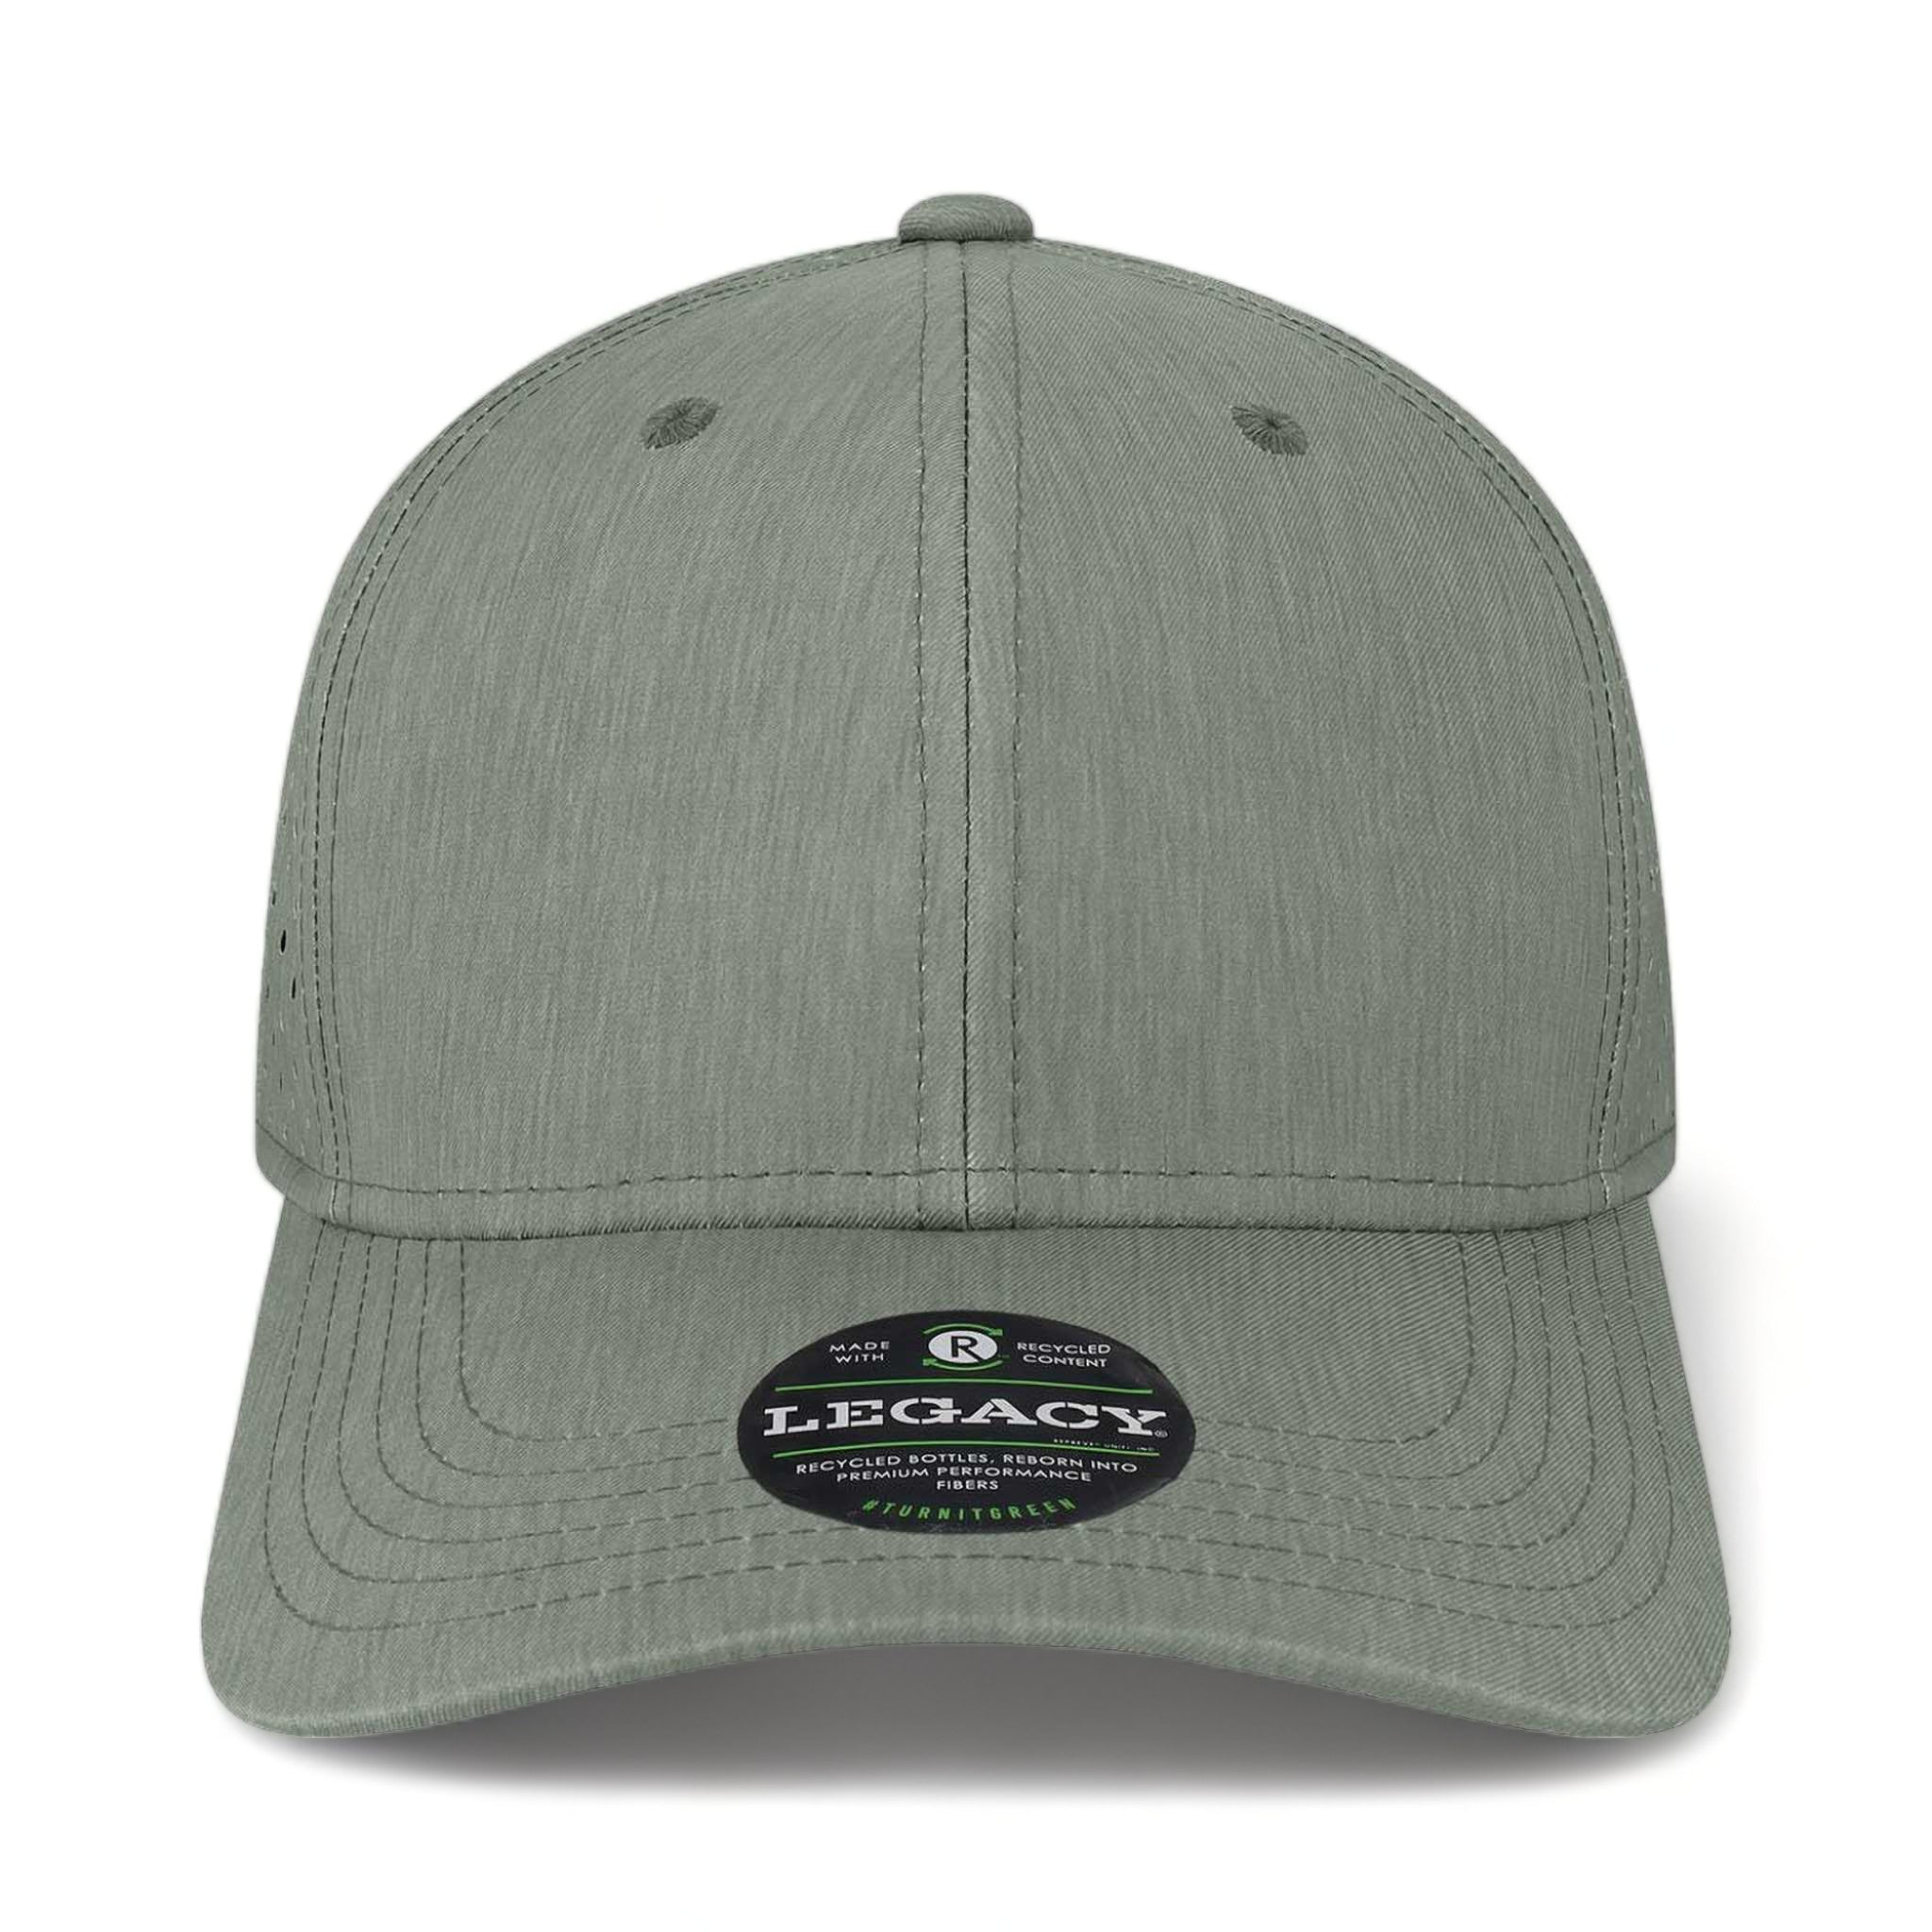 Front view of LEGACY REMPA custom hat in eco dark grey